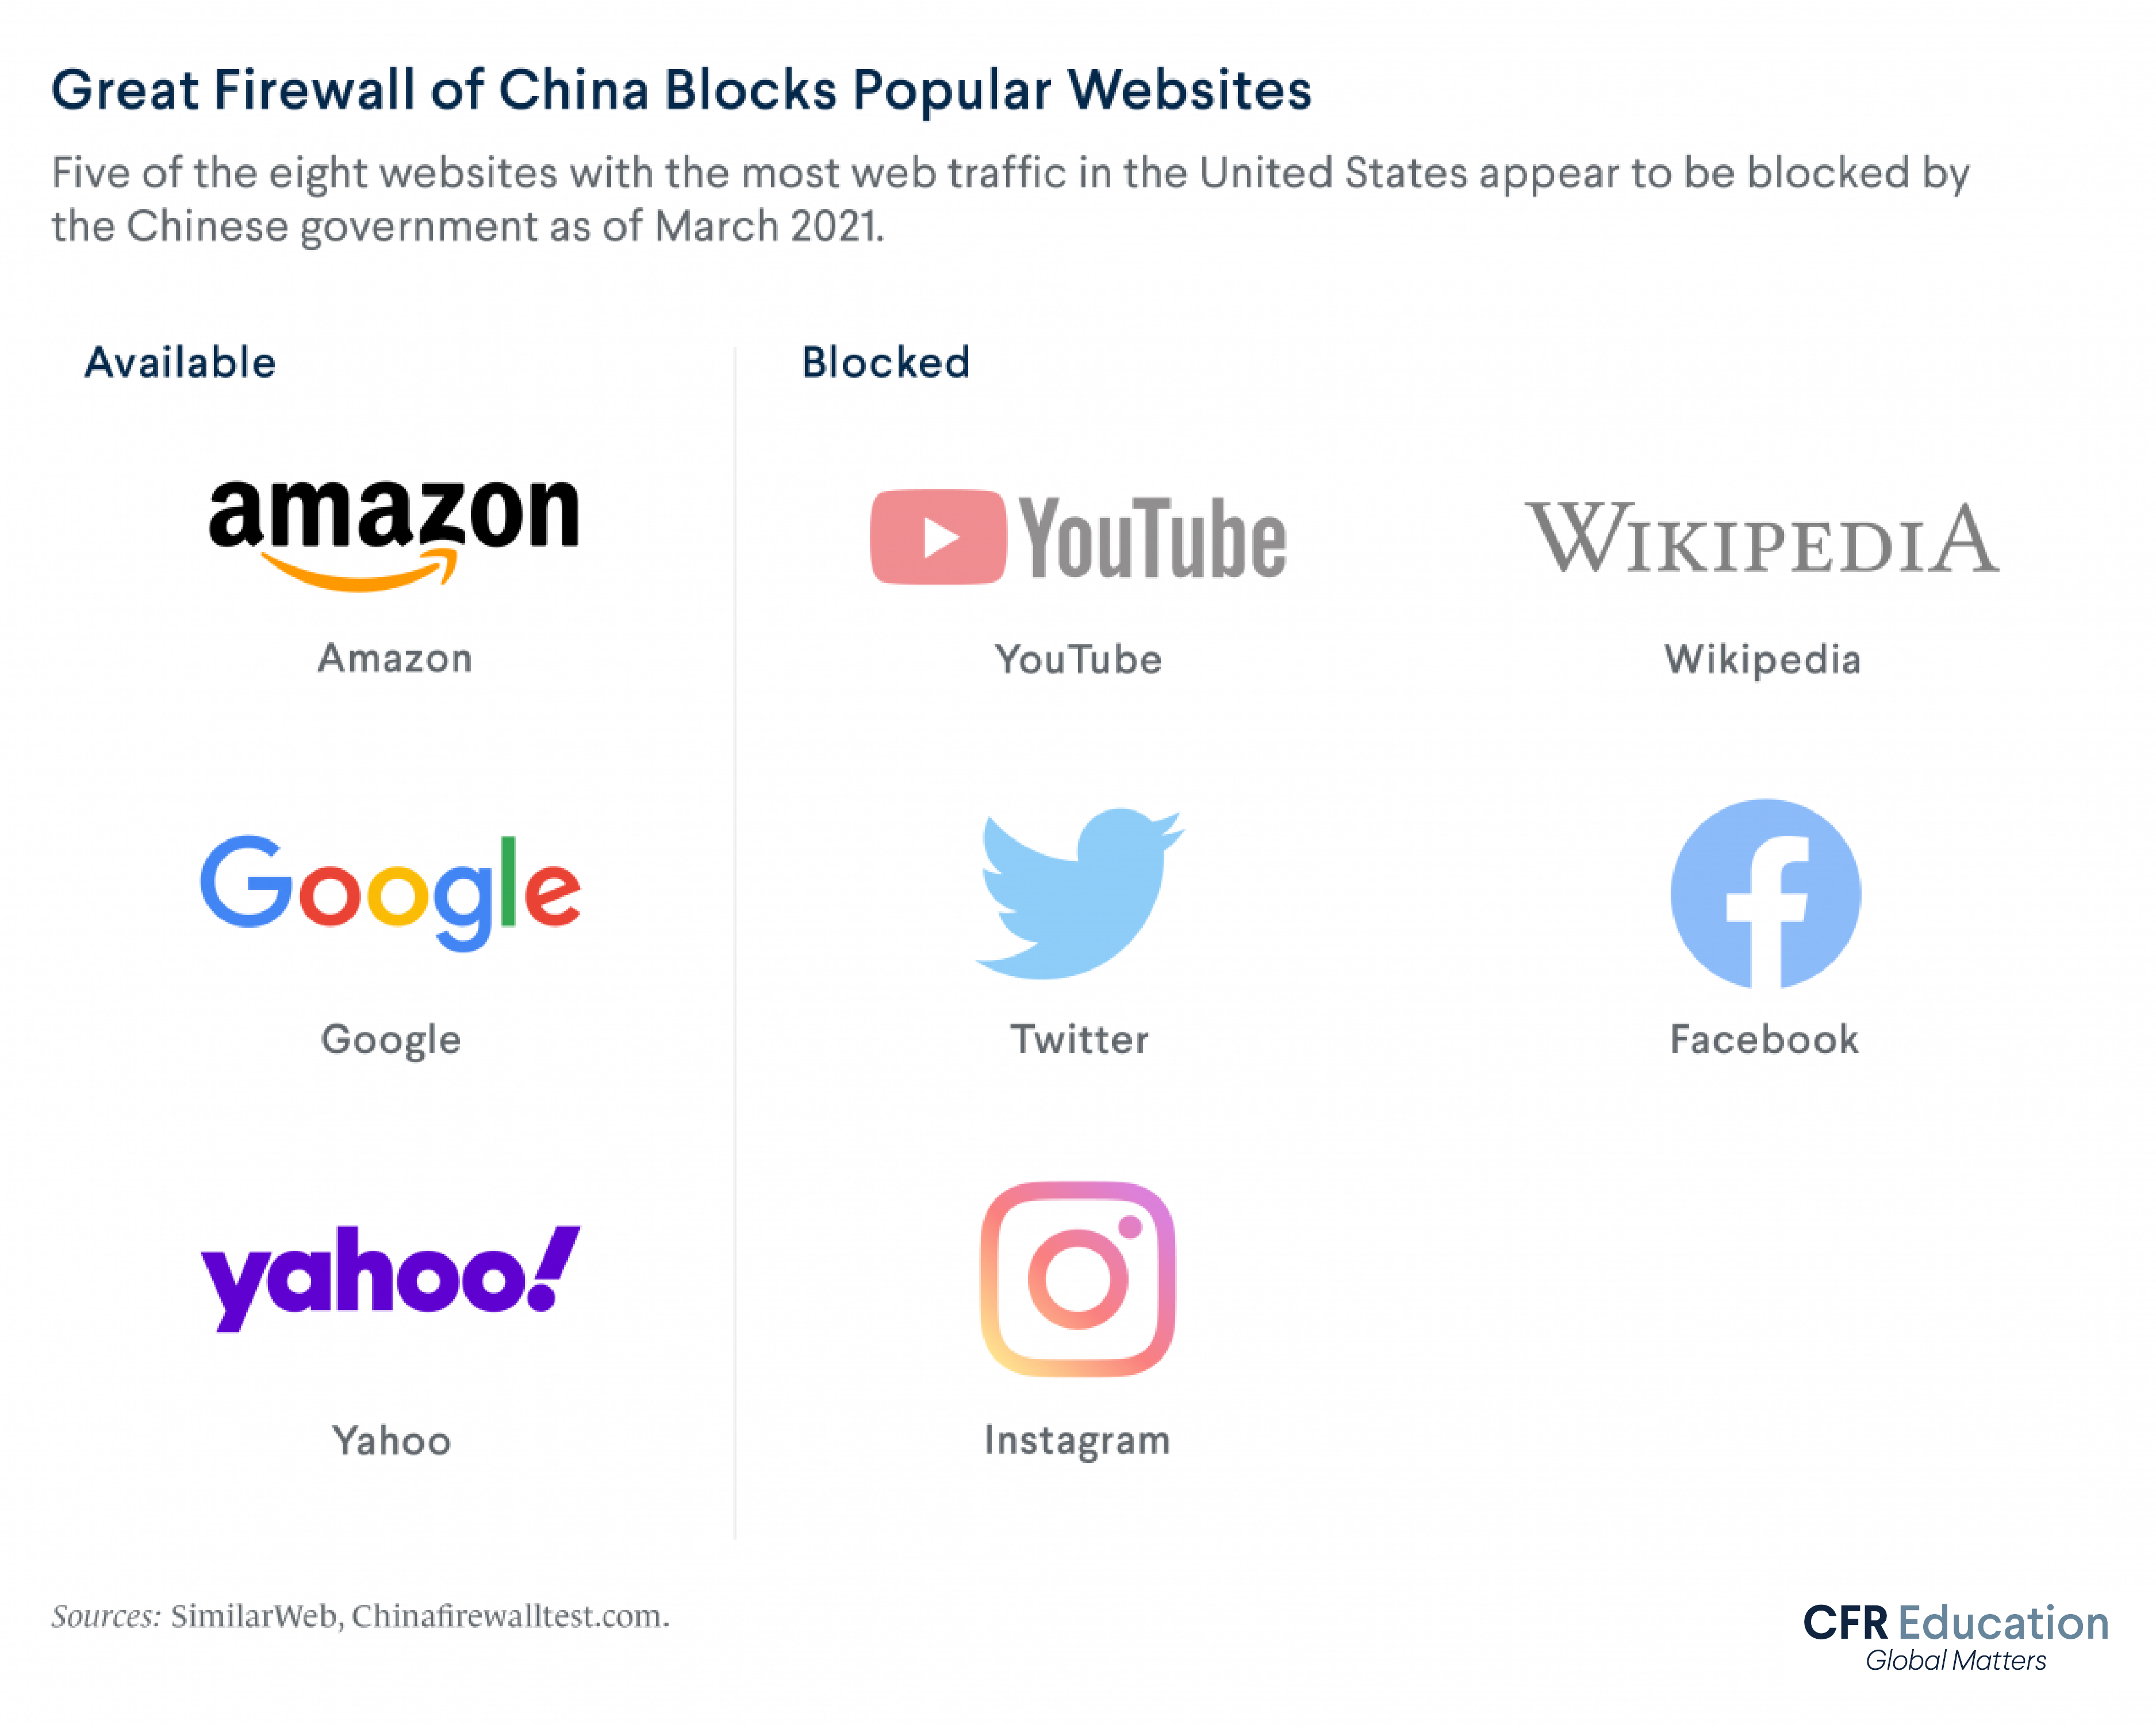 Graphic showing how five of the eight websites with the most web traffic in the U.S. (YouTube, Wikipedia, Facebook, Twitter, and Instagram) appeared to be blocked by the Chinese government as of March 2021. More info contact us at cfr_education@cfr.org.